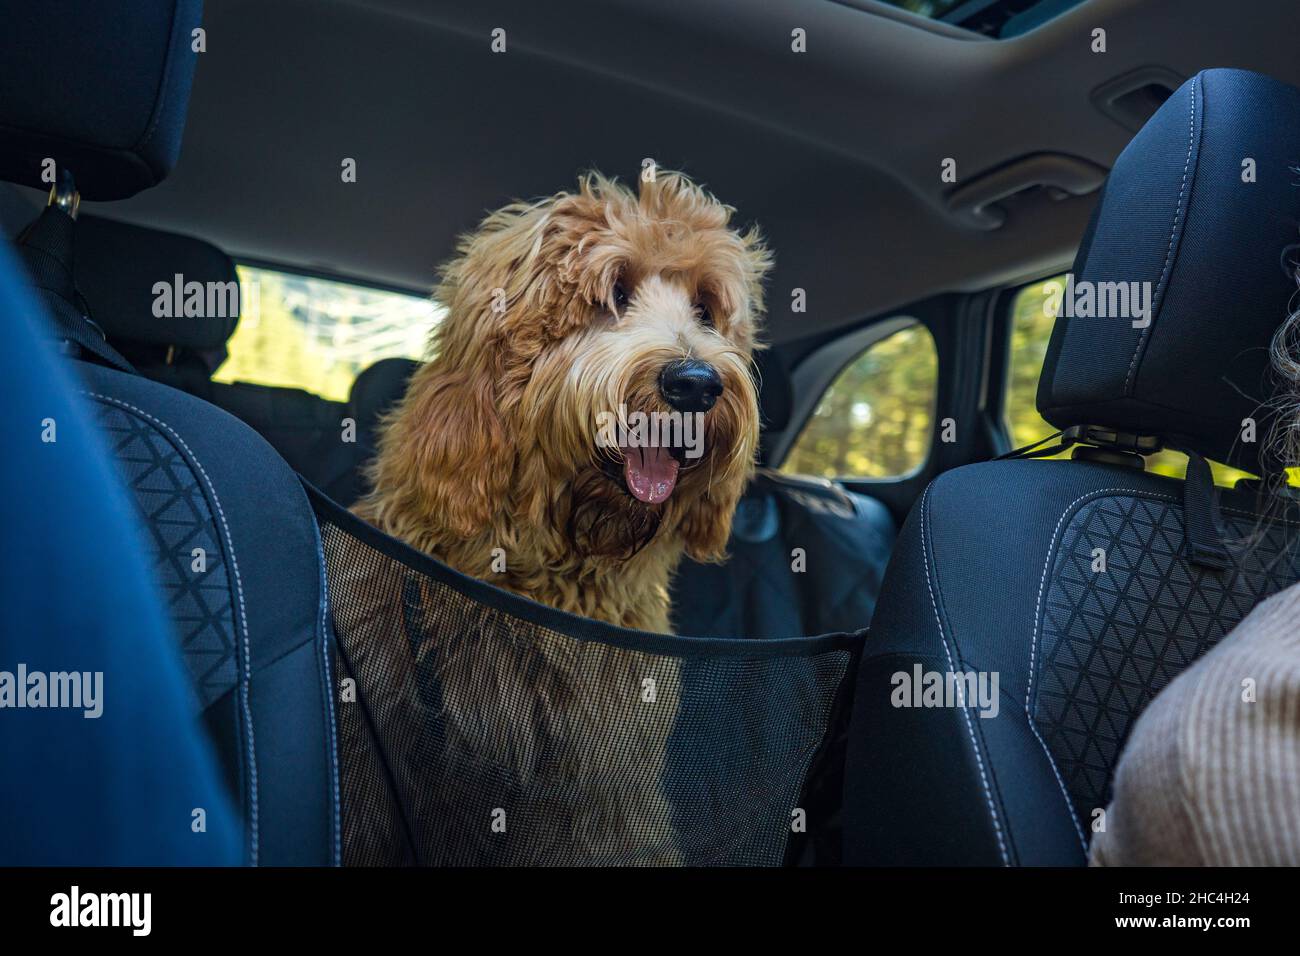 happy golden doodle dog sitting in the back of the car Stock Photo